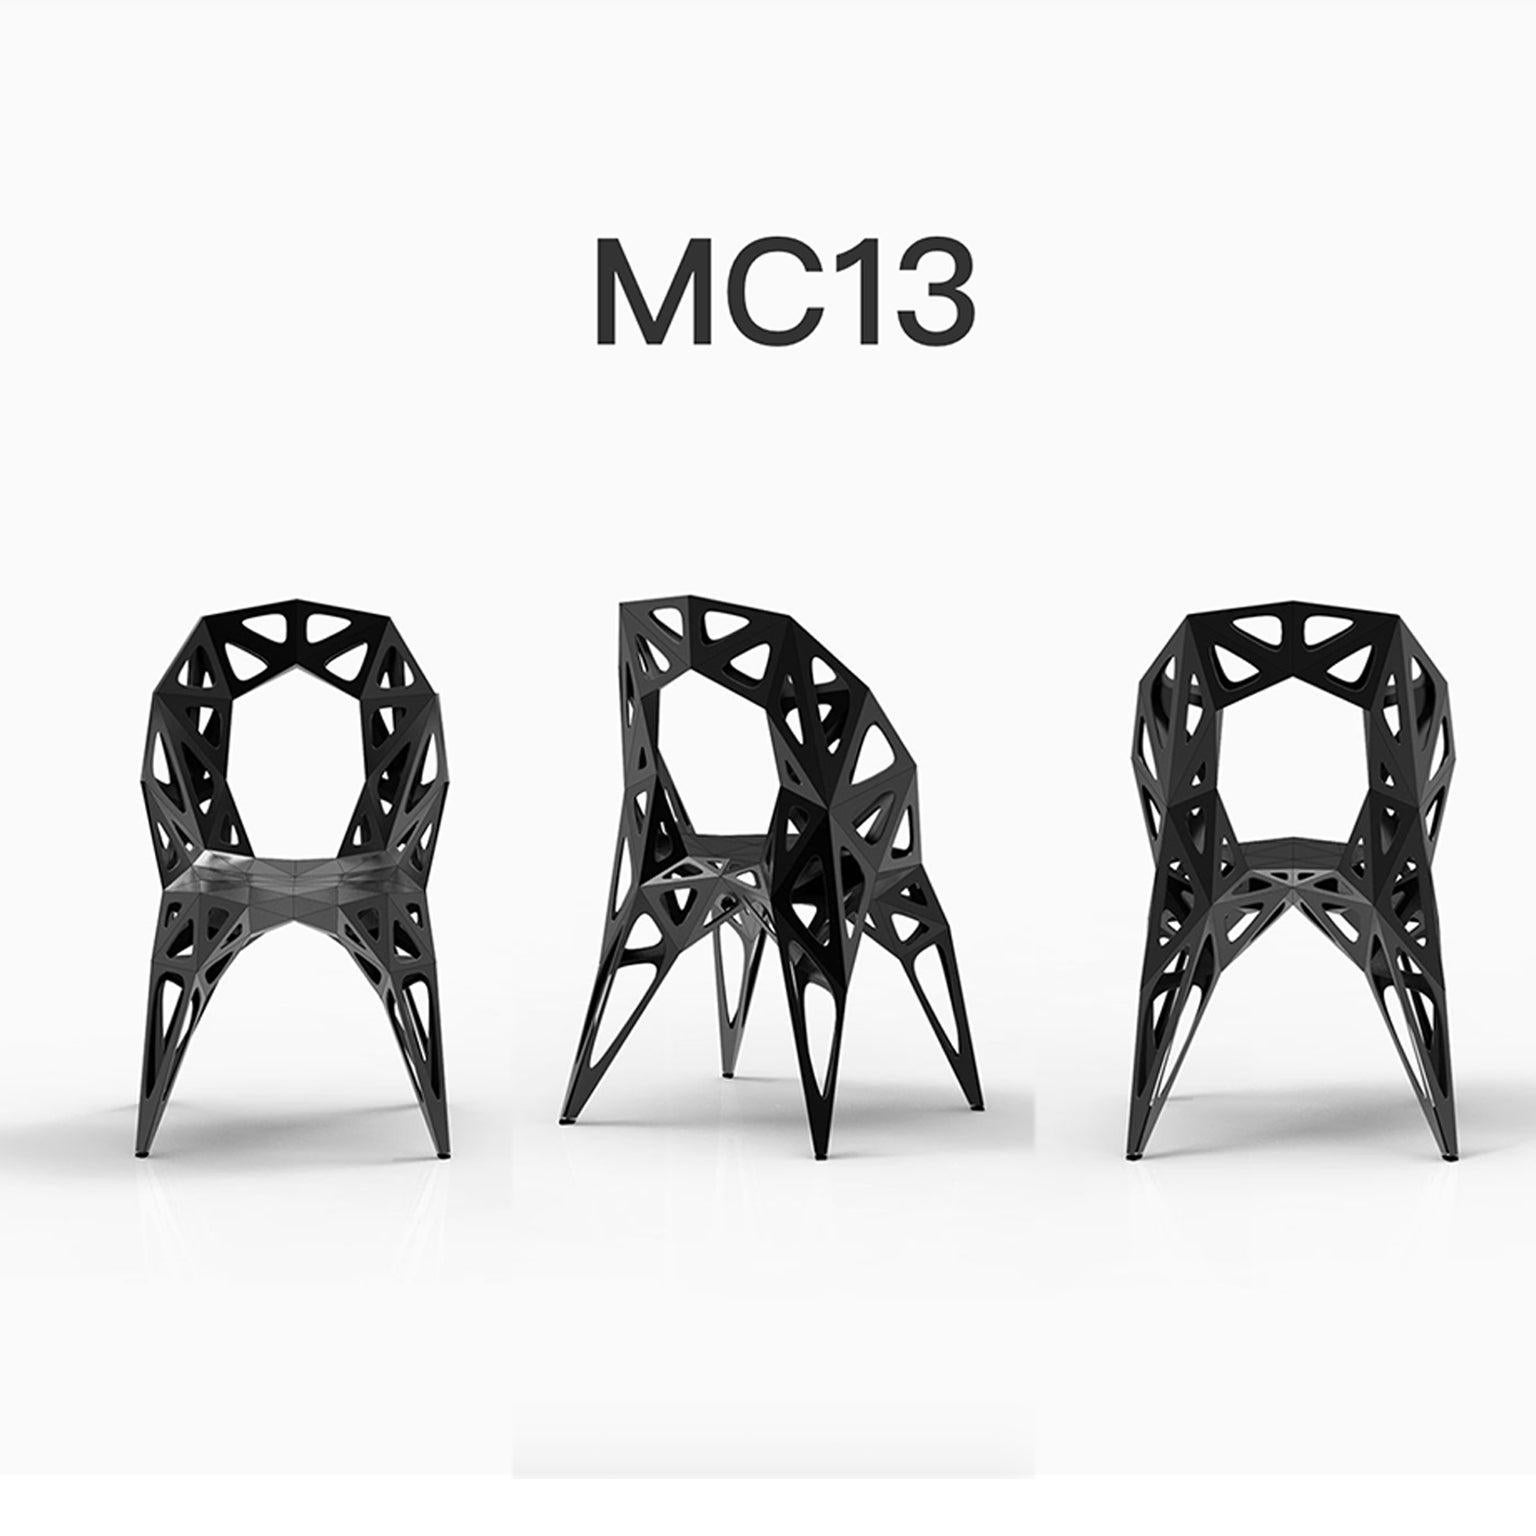 Outdoor and indoor
3 official types chairs / available
Solid
Dots
Frame
2 colors official / available / finish in polish/matt
Black
Silver

Furniture designer Zhoujie Zhang is known for the integration of automated digital design and